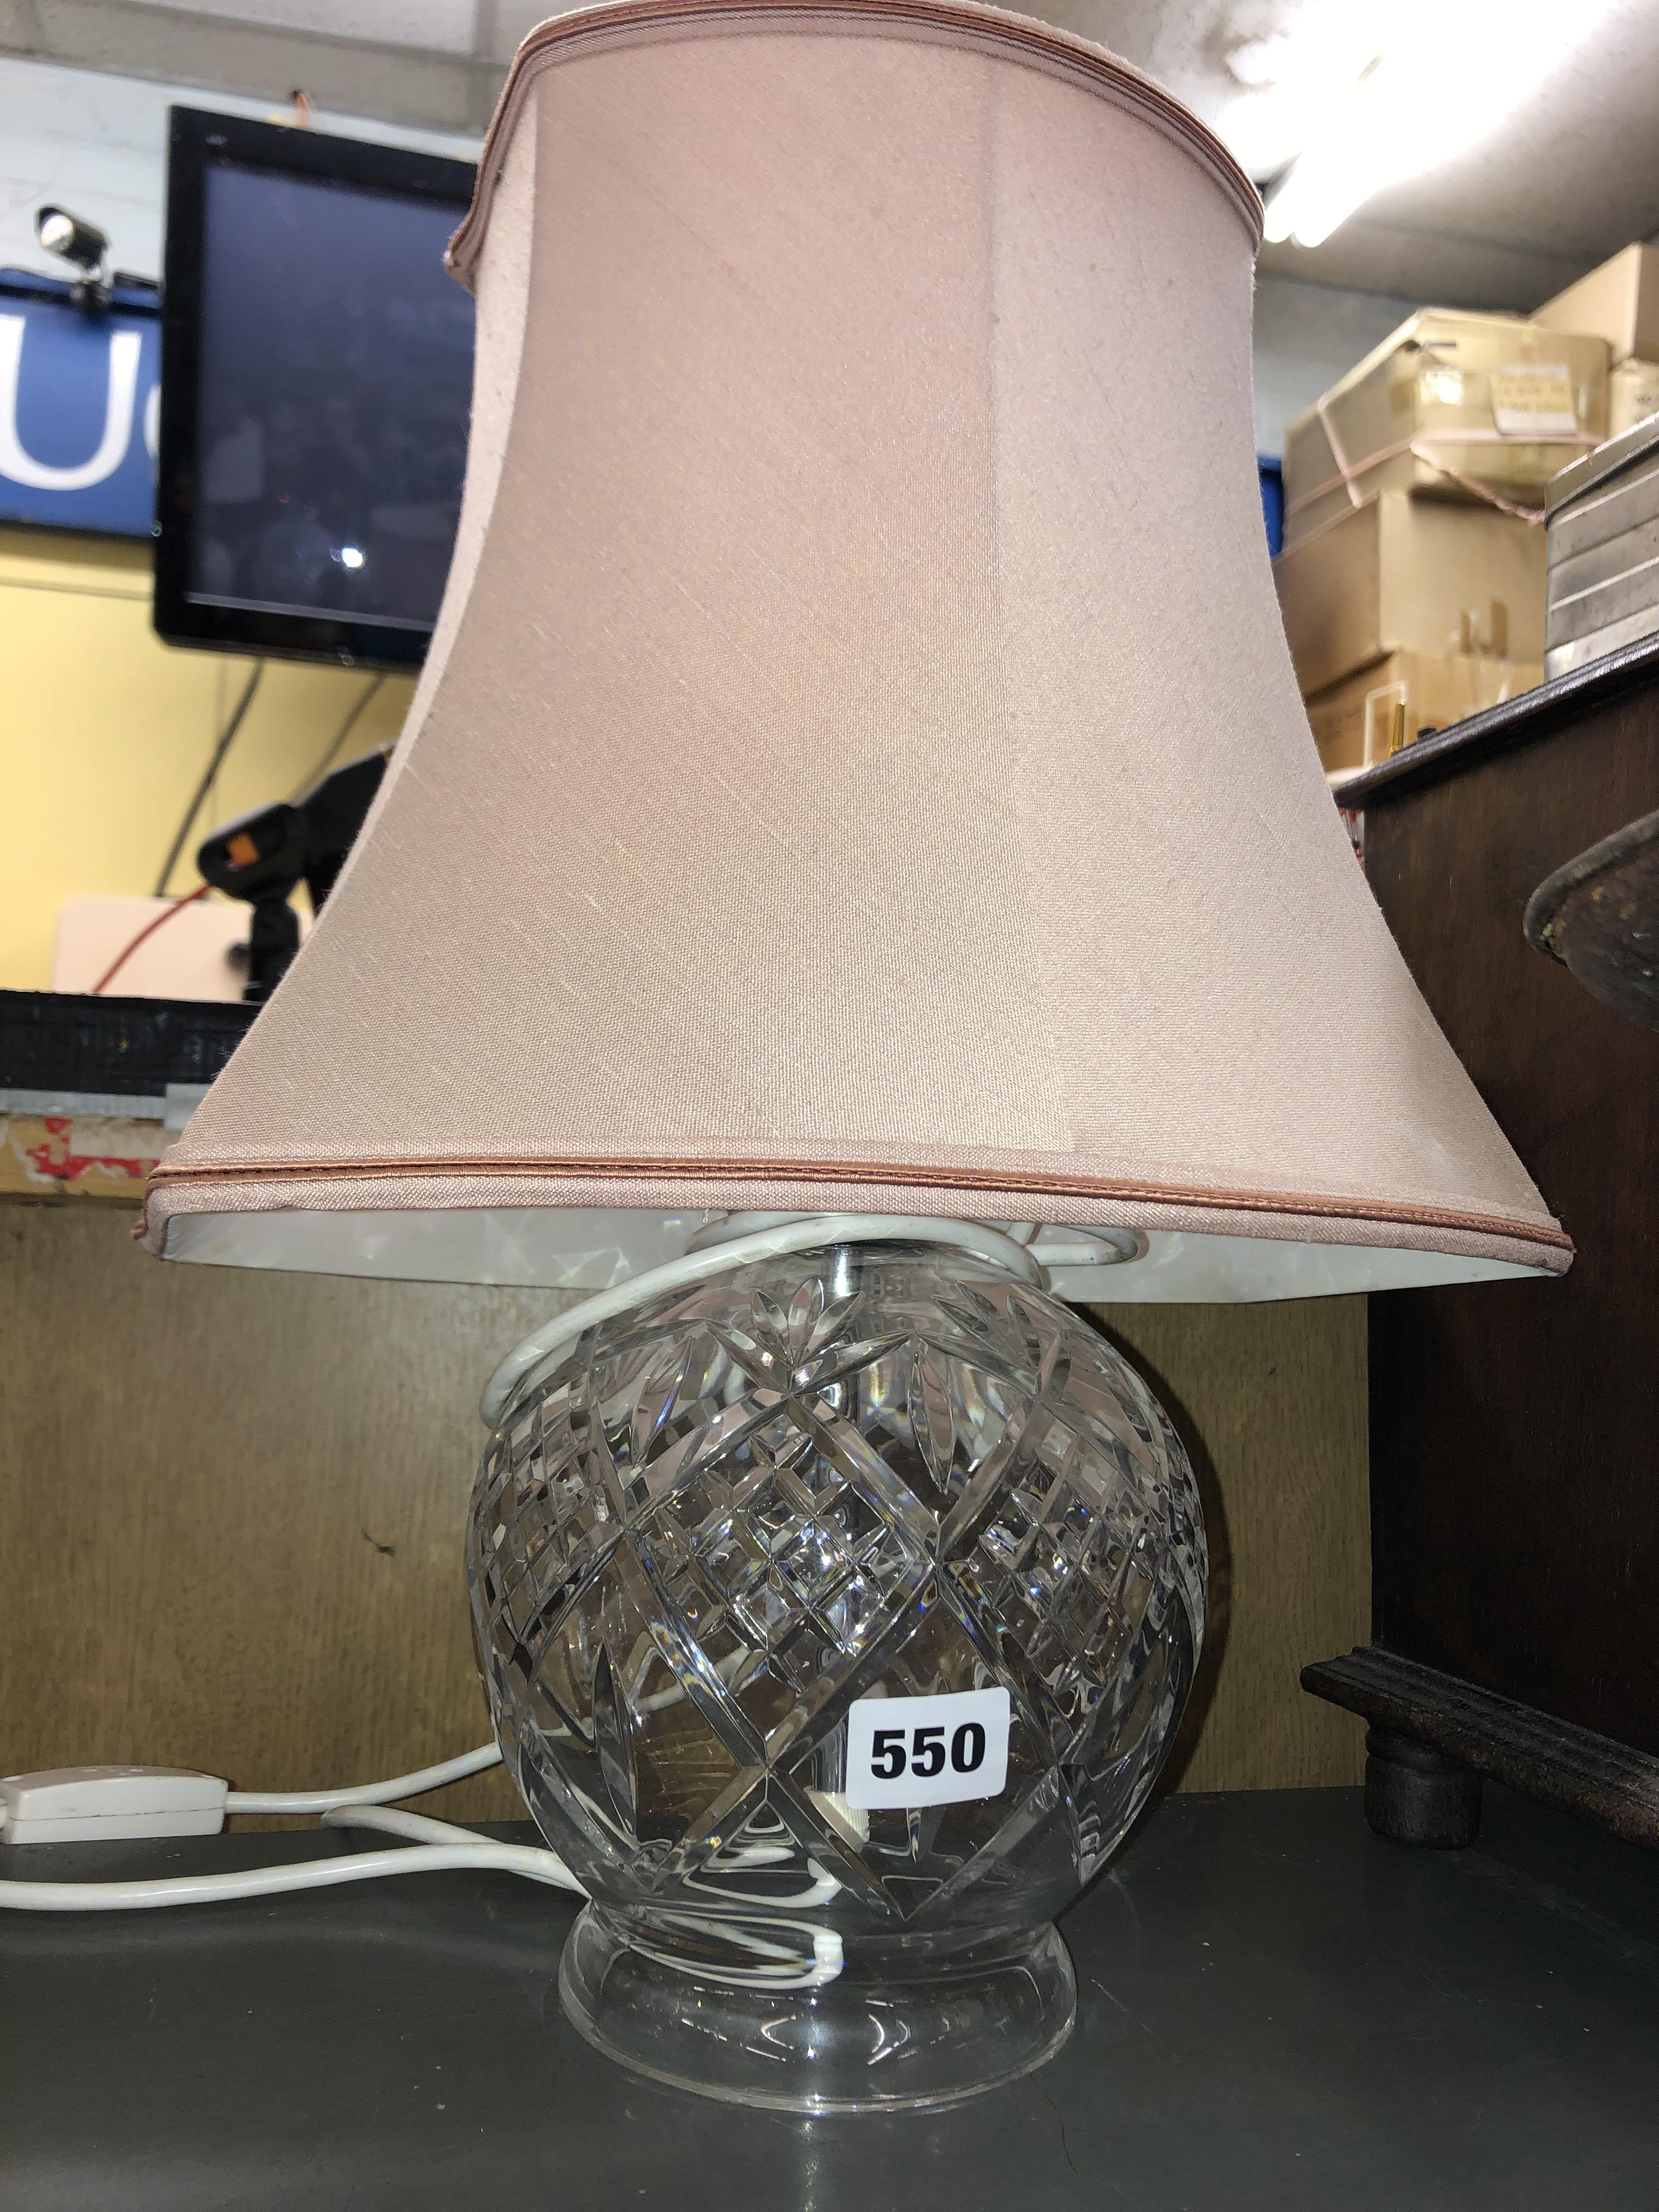 CUT GLASS GLOBULAR TABLE LAMP WITH PINK SHADE